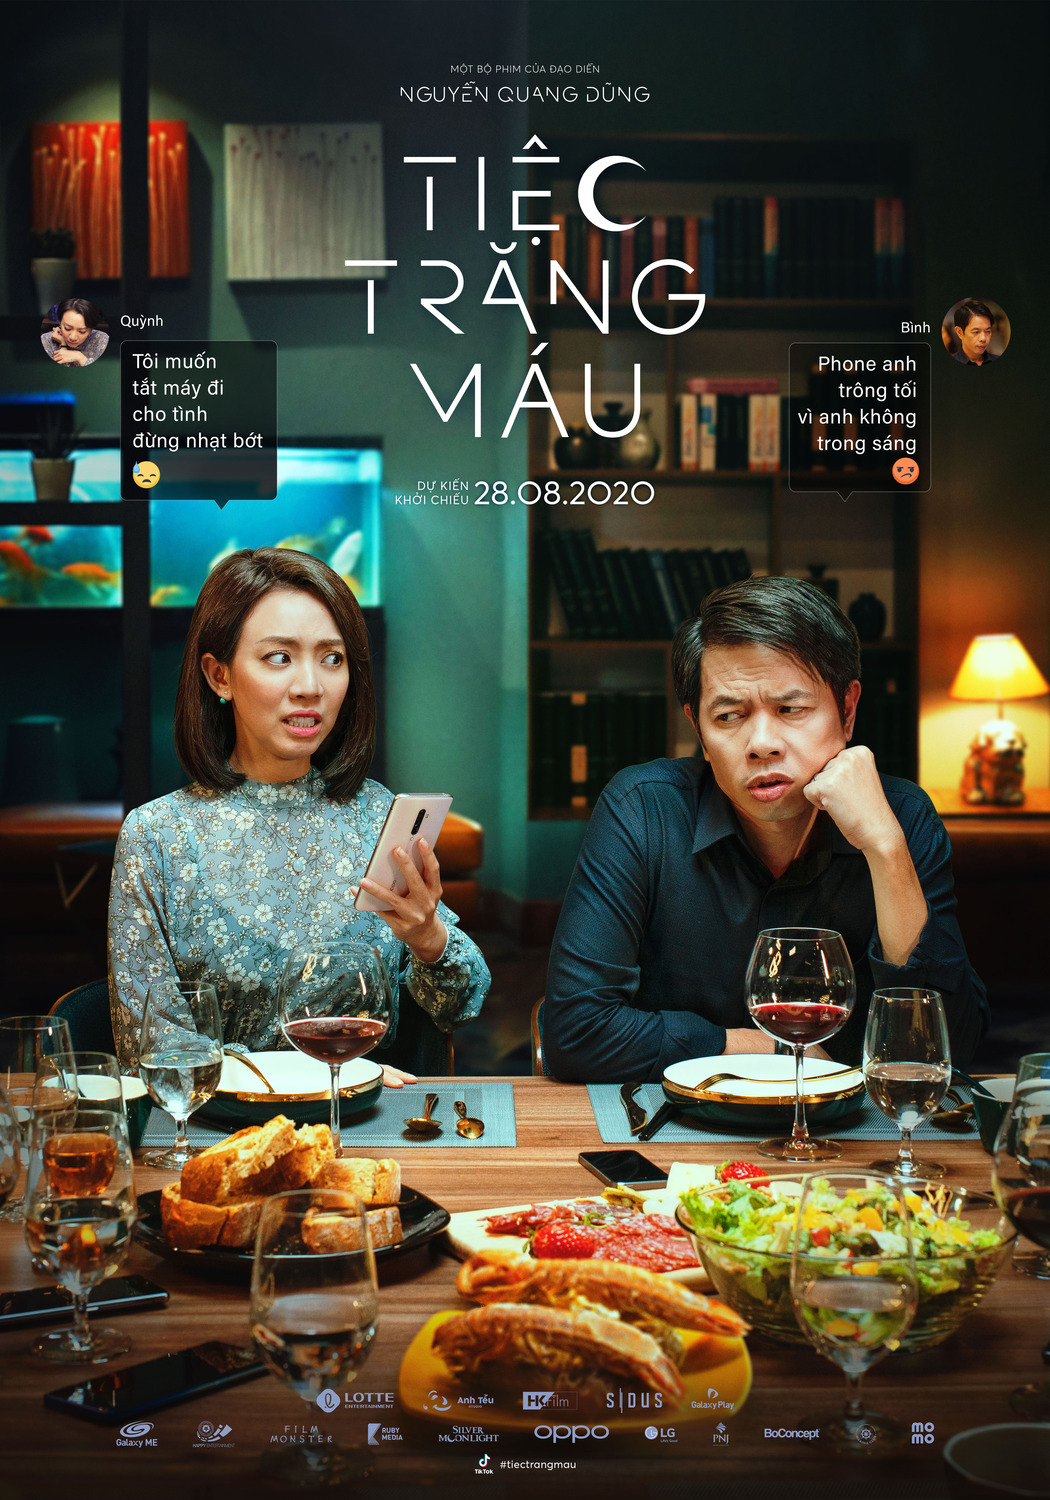 Extra Large Movie Poster Image for Tiec trang máu (#6 of 7)